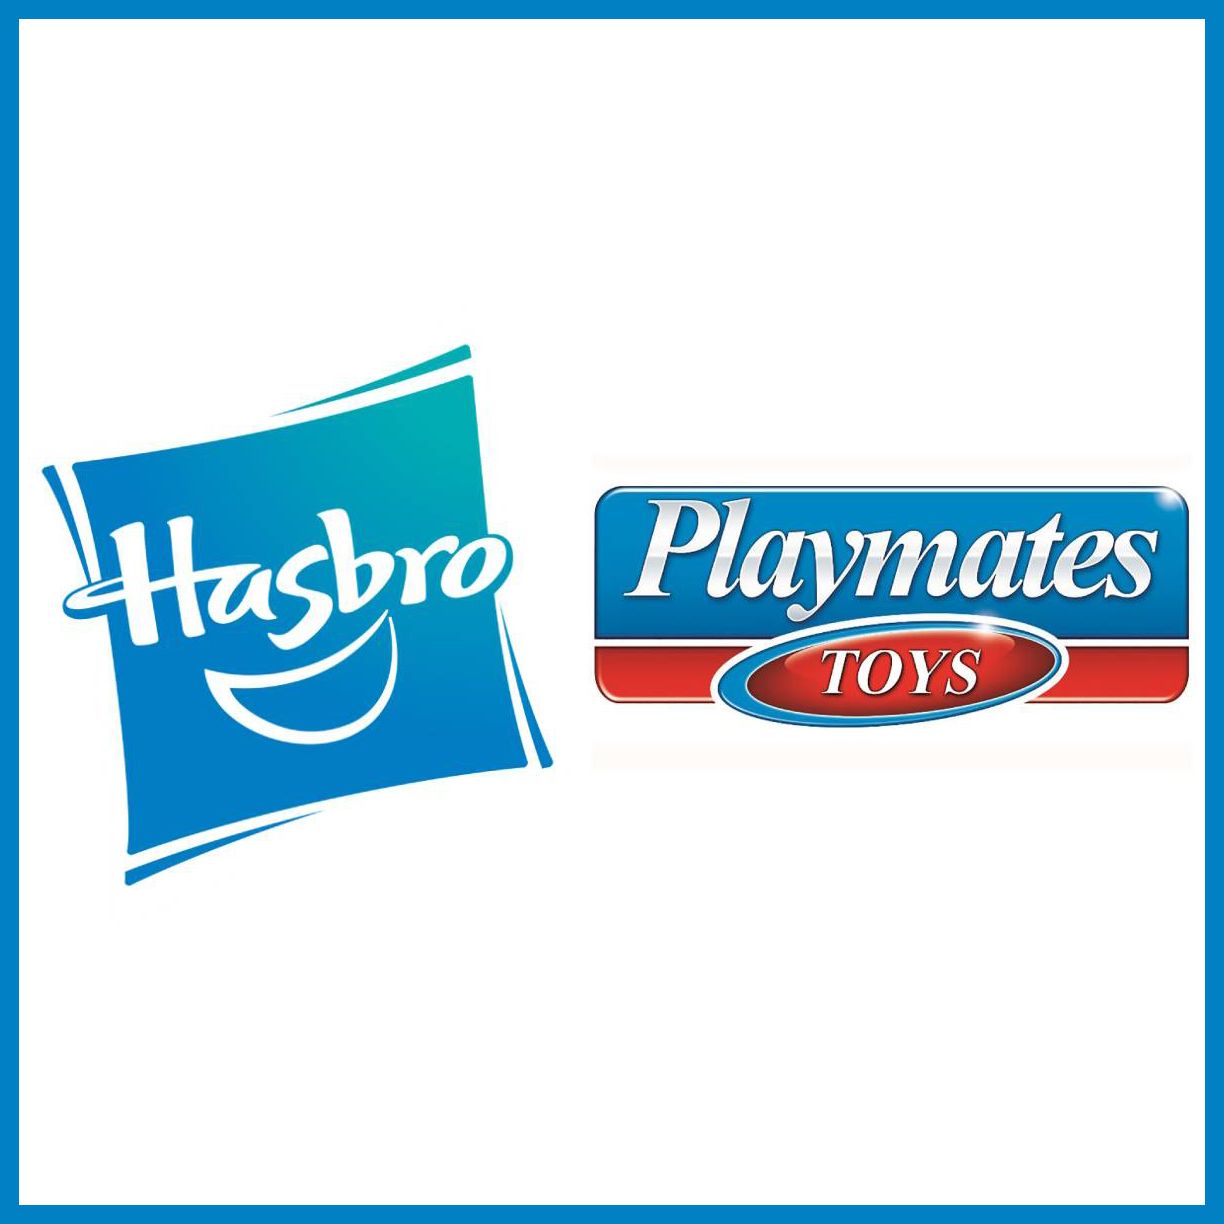 Hasbro and Playmates Toys Enter Strategic Relationship to Produce and Distribute Power Rangers Product